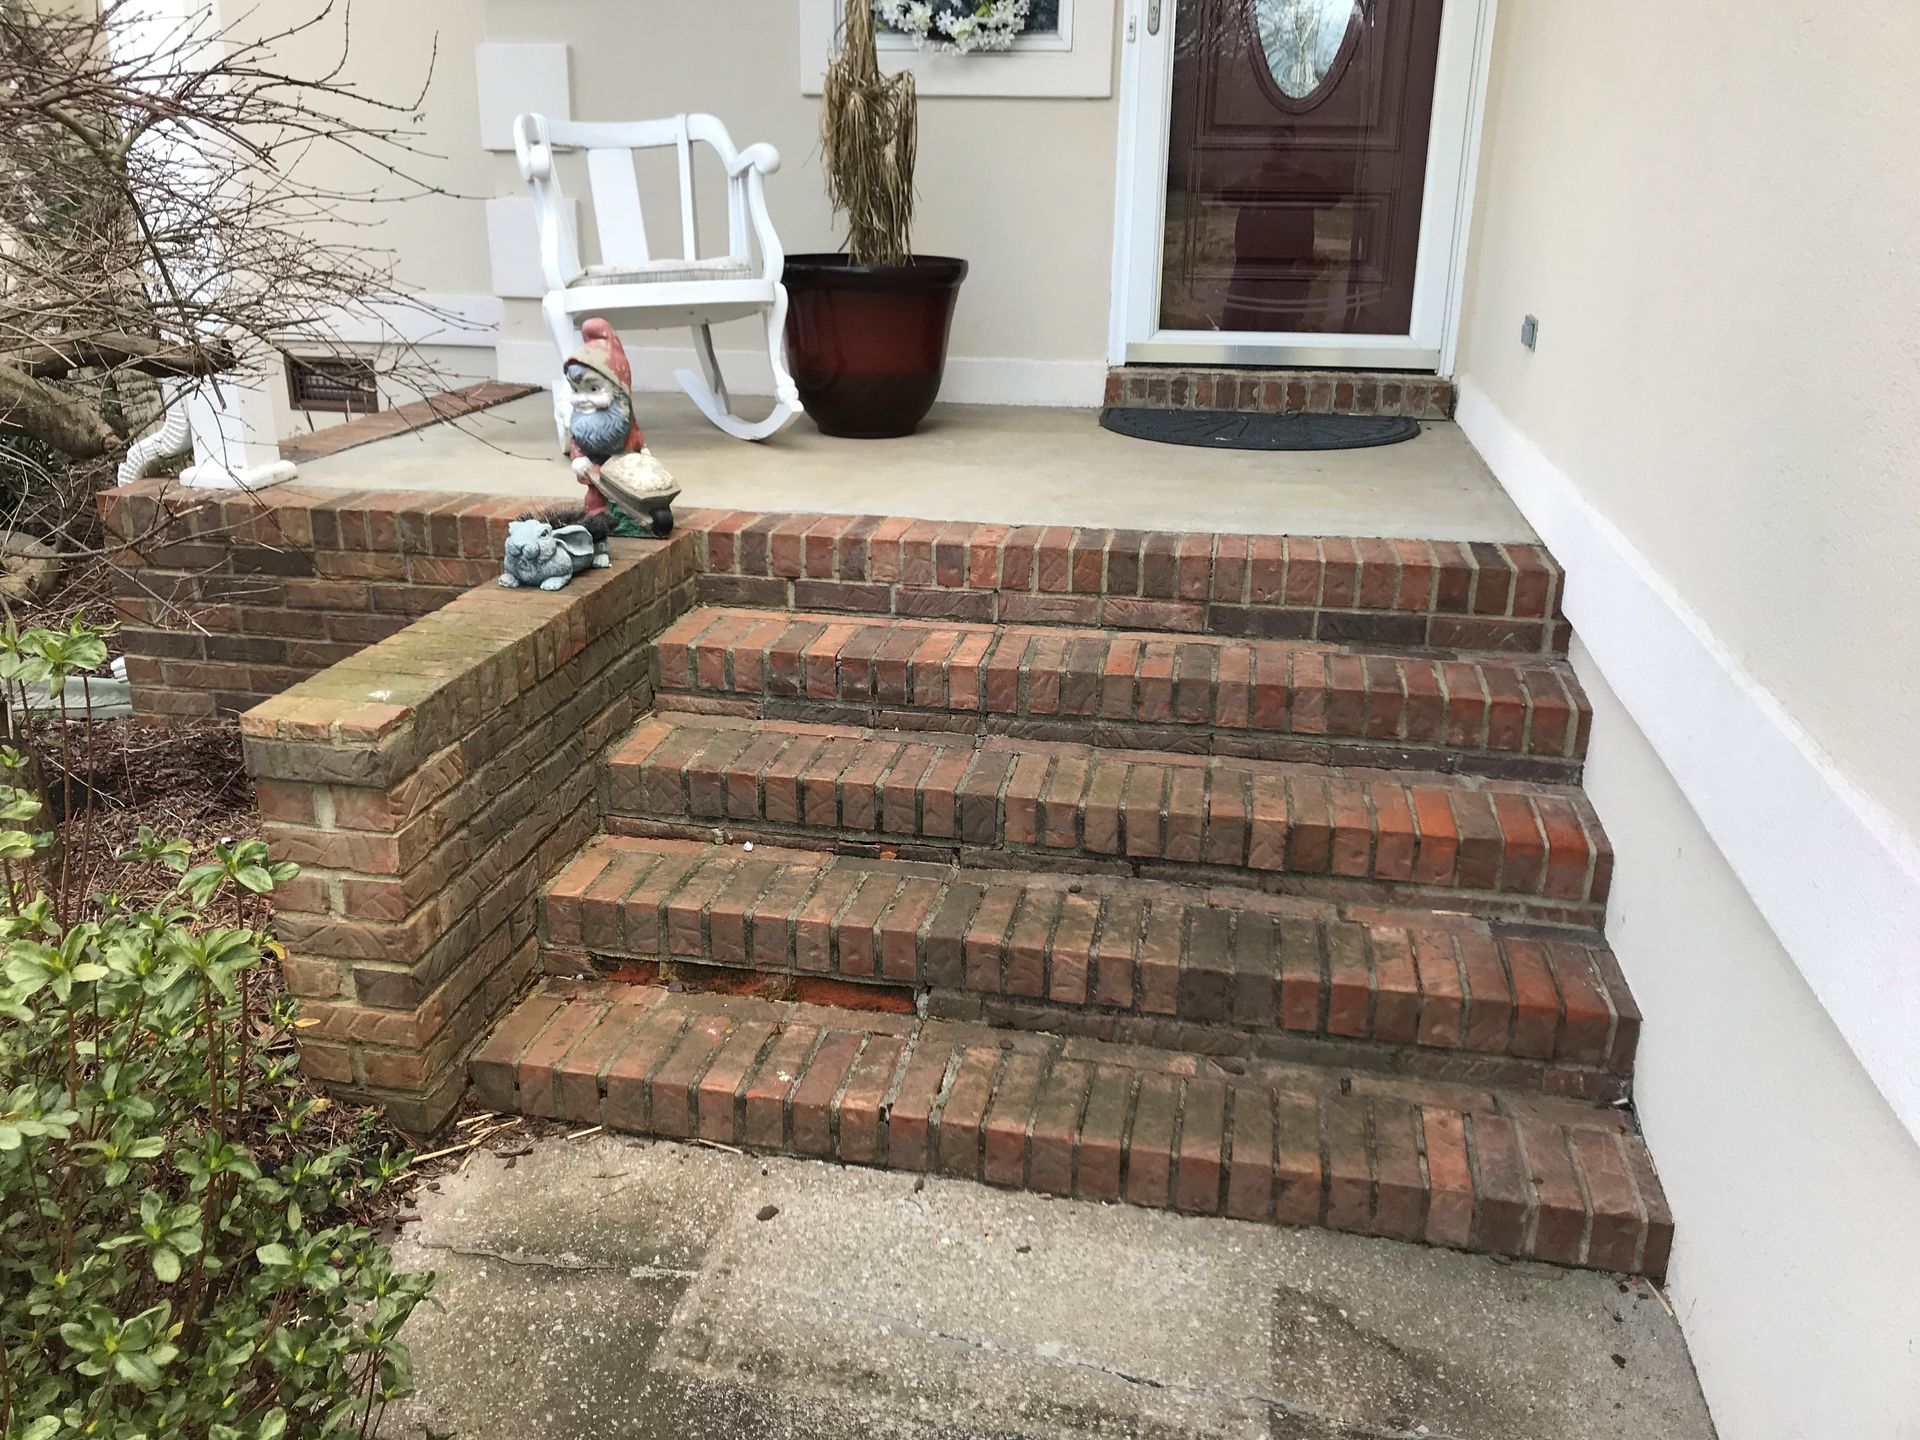 Before Expert Step Replacements